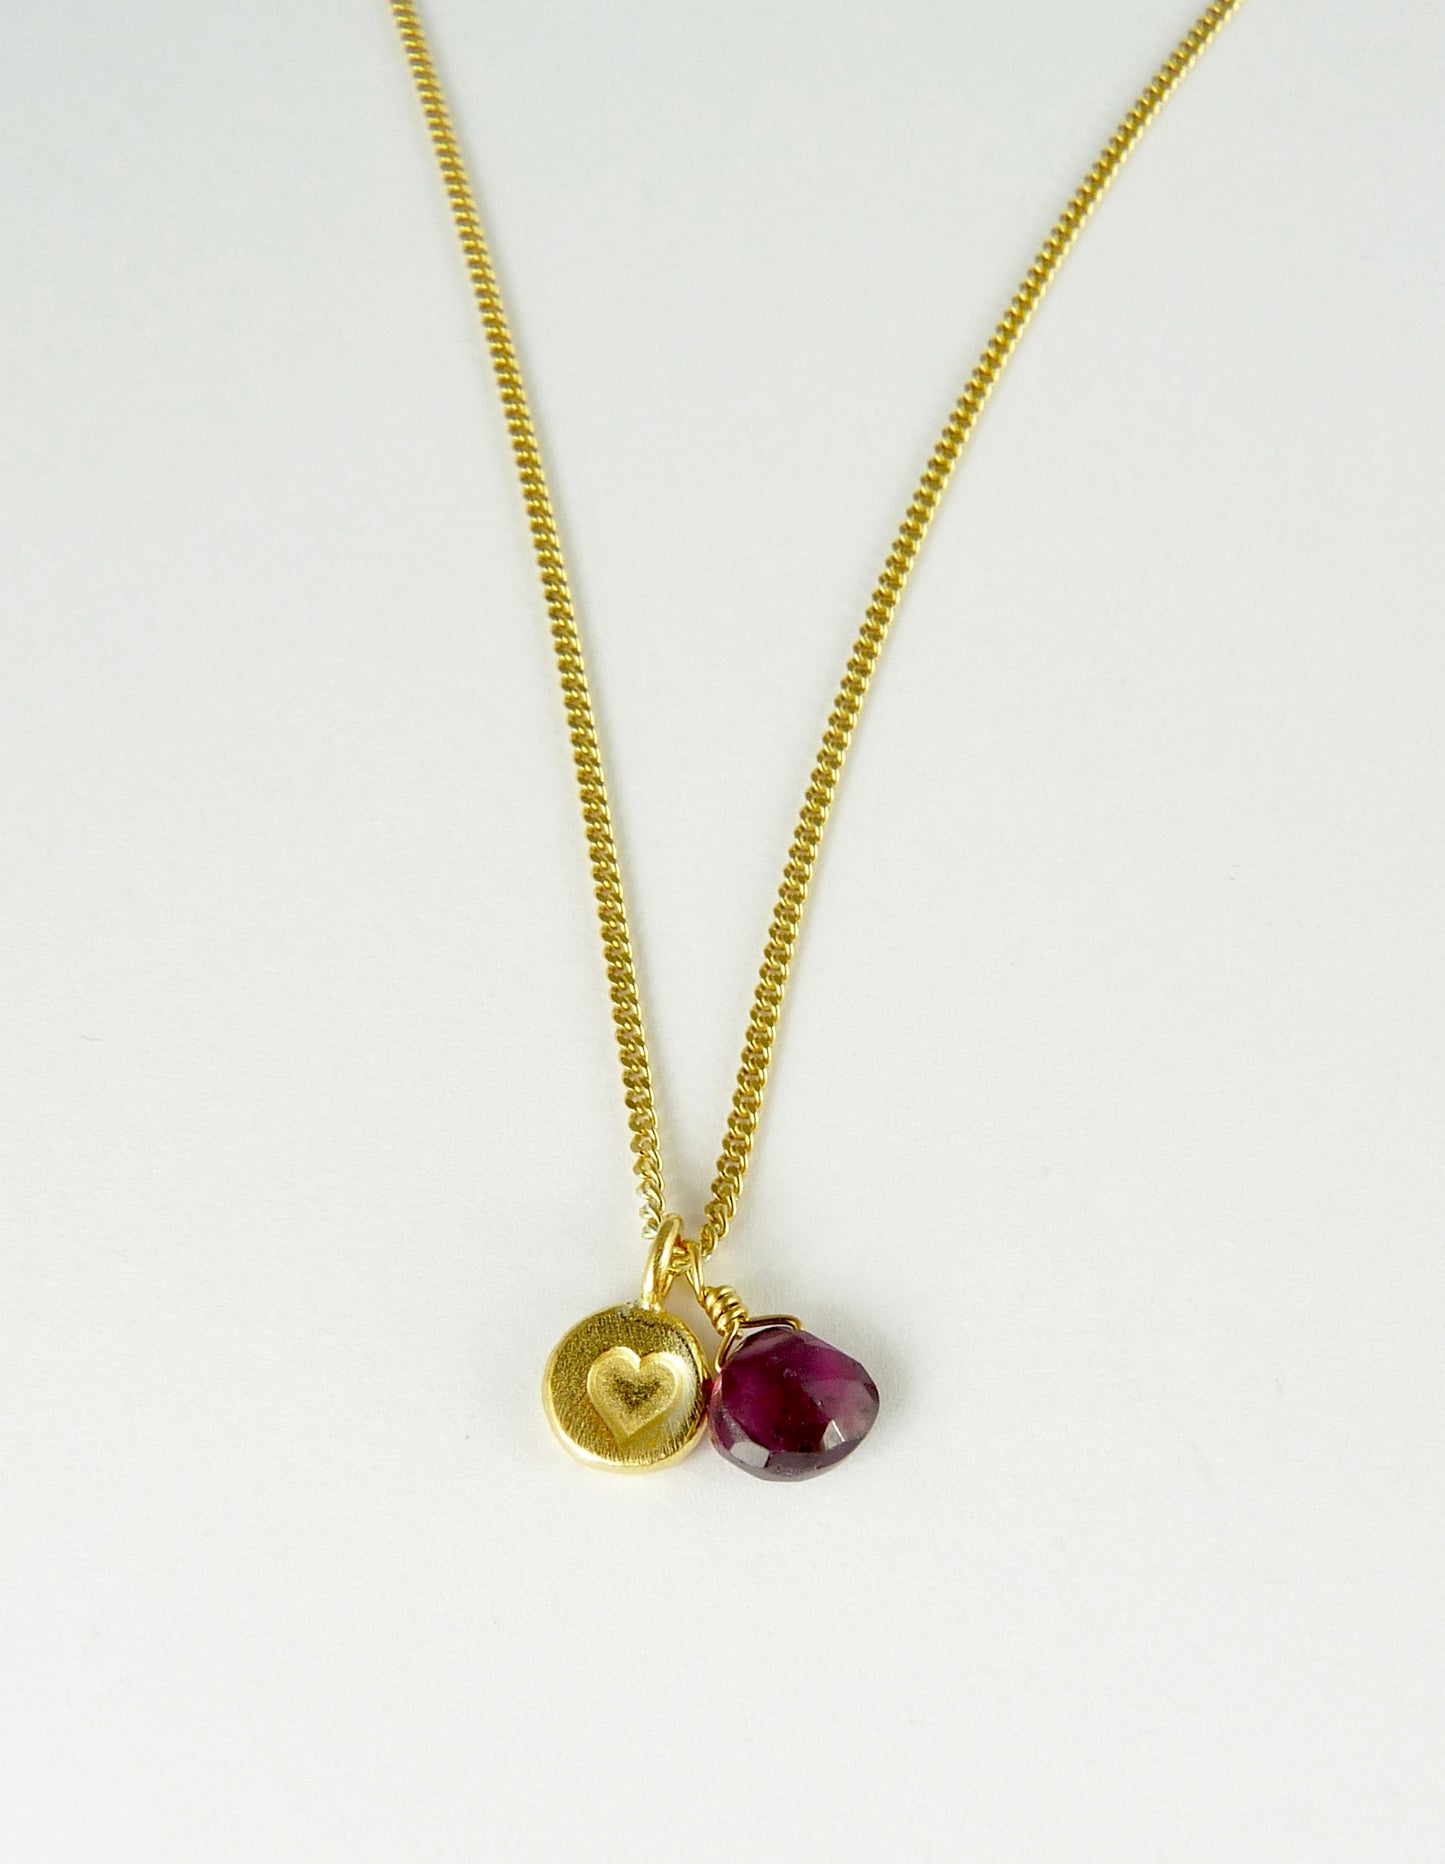 Heart and garnet necklace